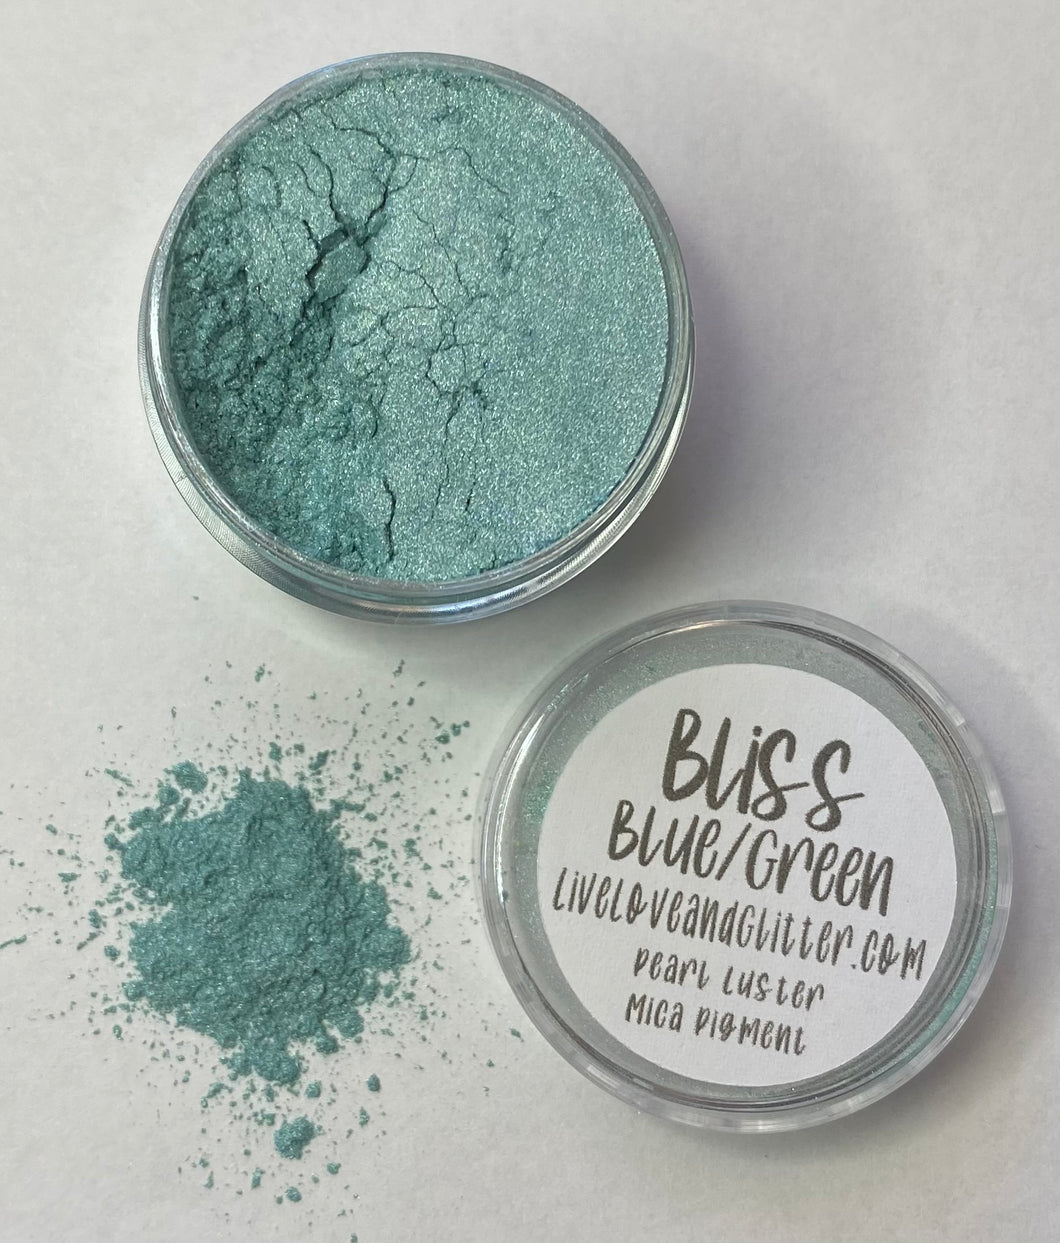 Bliss Pearl Luster Mica Pigment